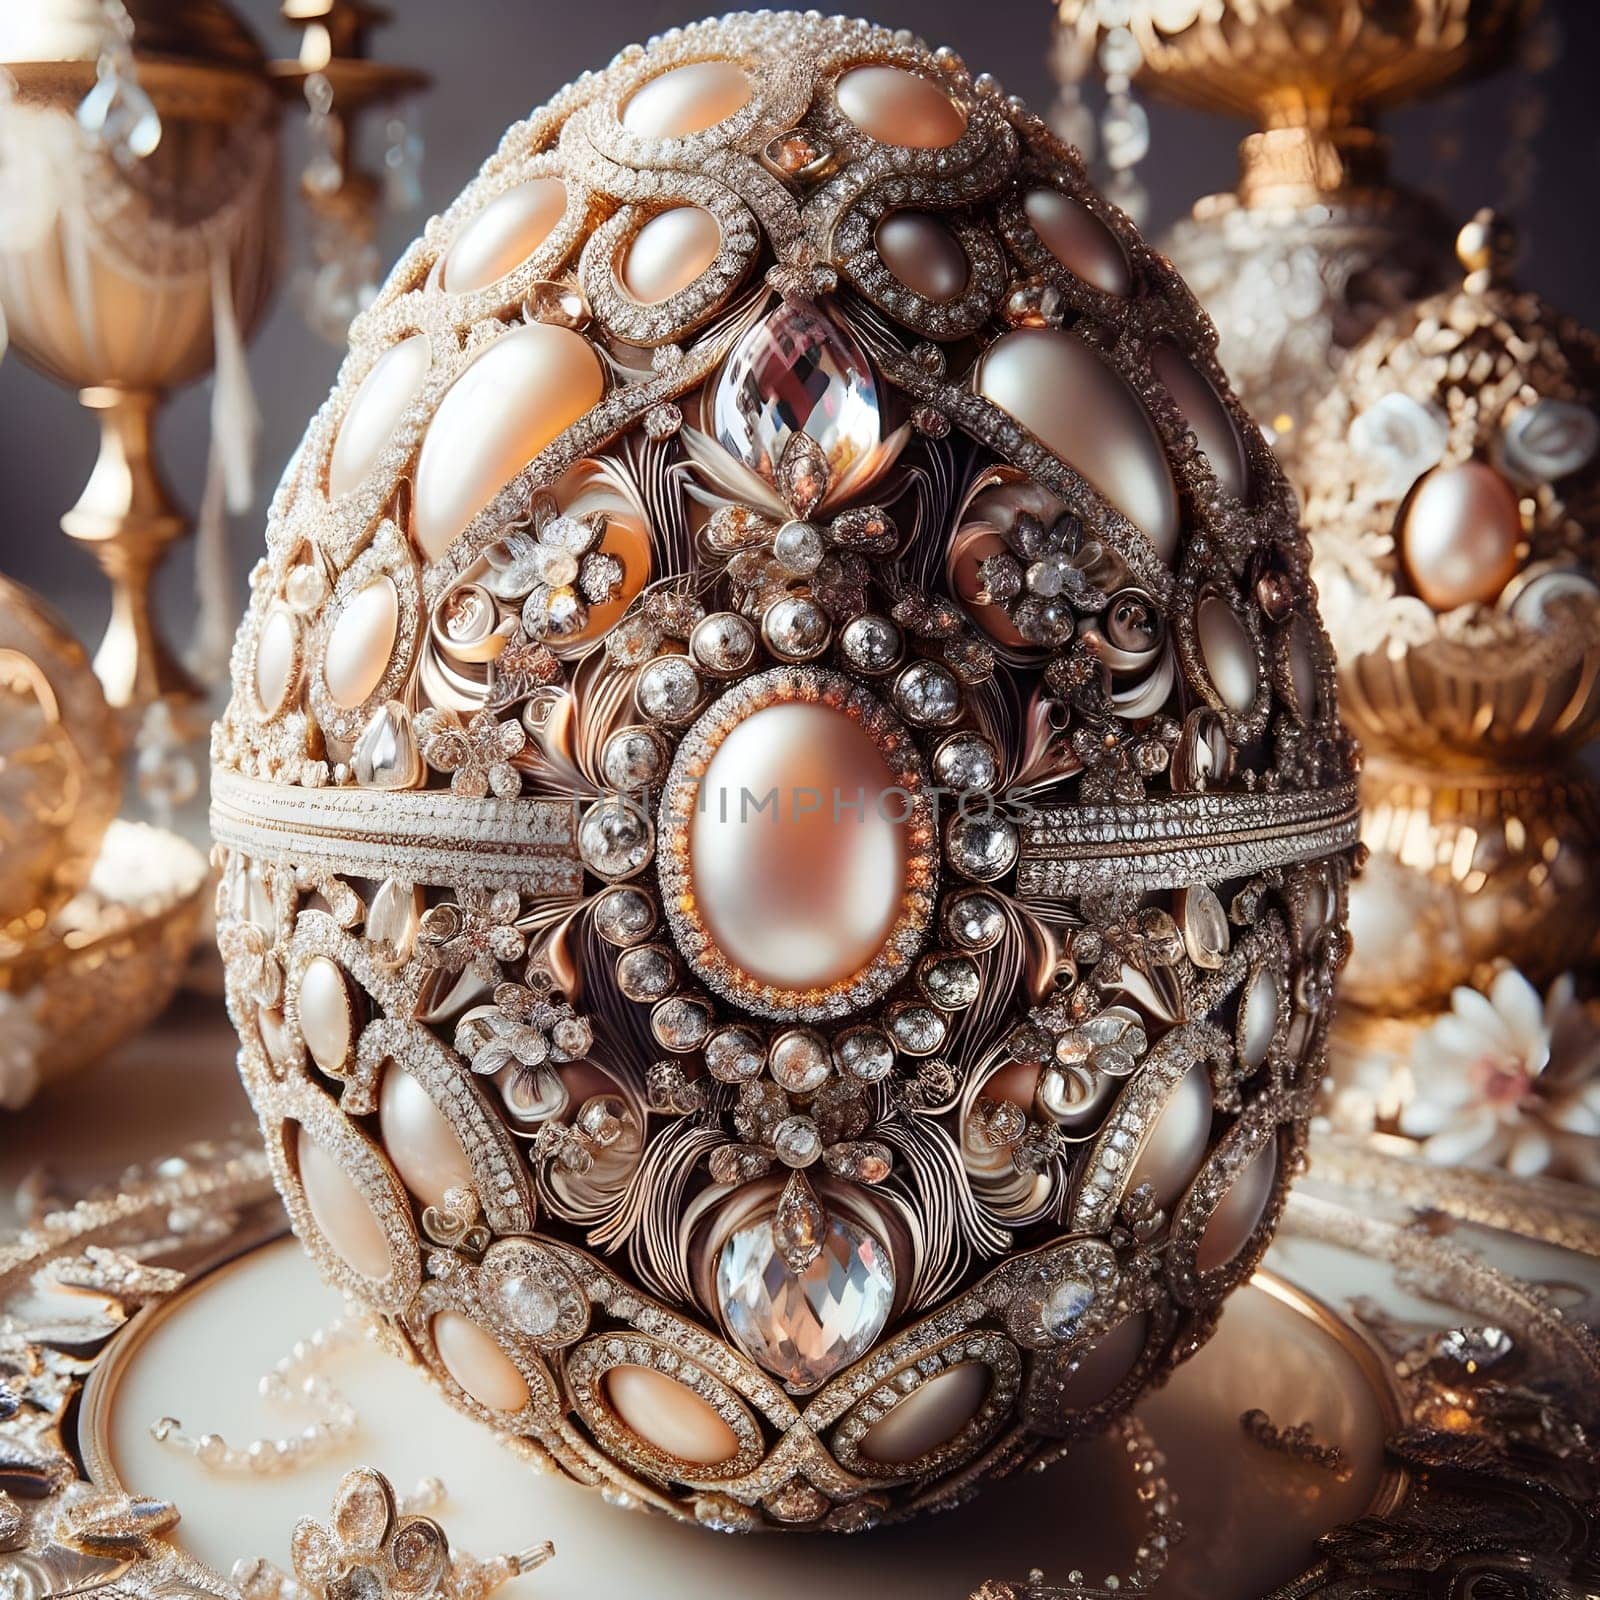 A luxurious easter egg, encrusted with sparkling jewels and intricate filigree, fit for royalty-free Jeweled Egg, Easter Egg, Paschal Egg, Jewelry Art, Home Decor, Art Collectible, OOAK Gifts by Designlab